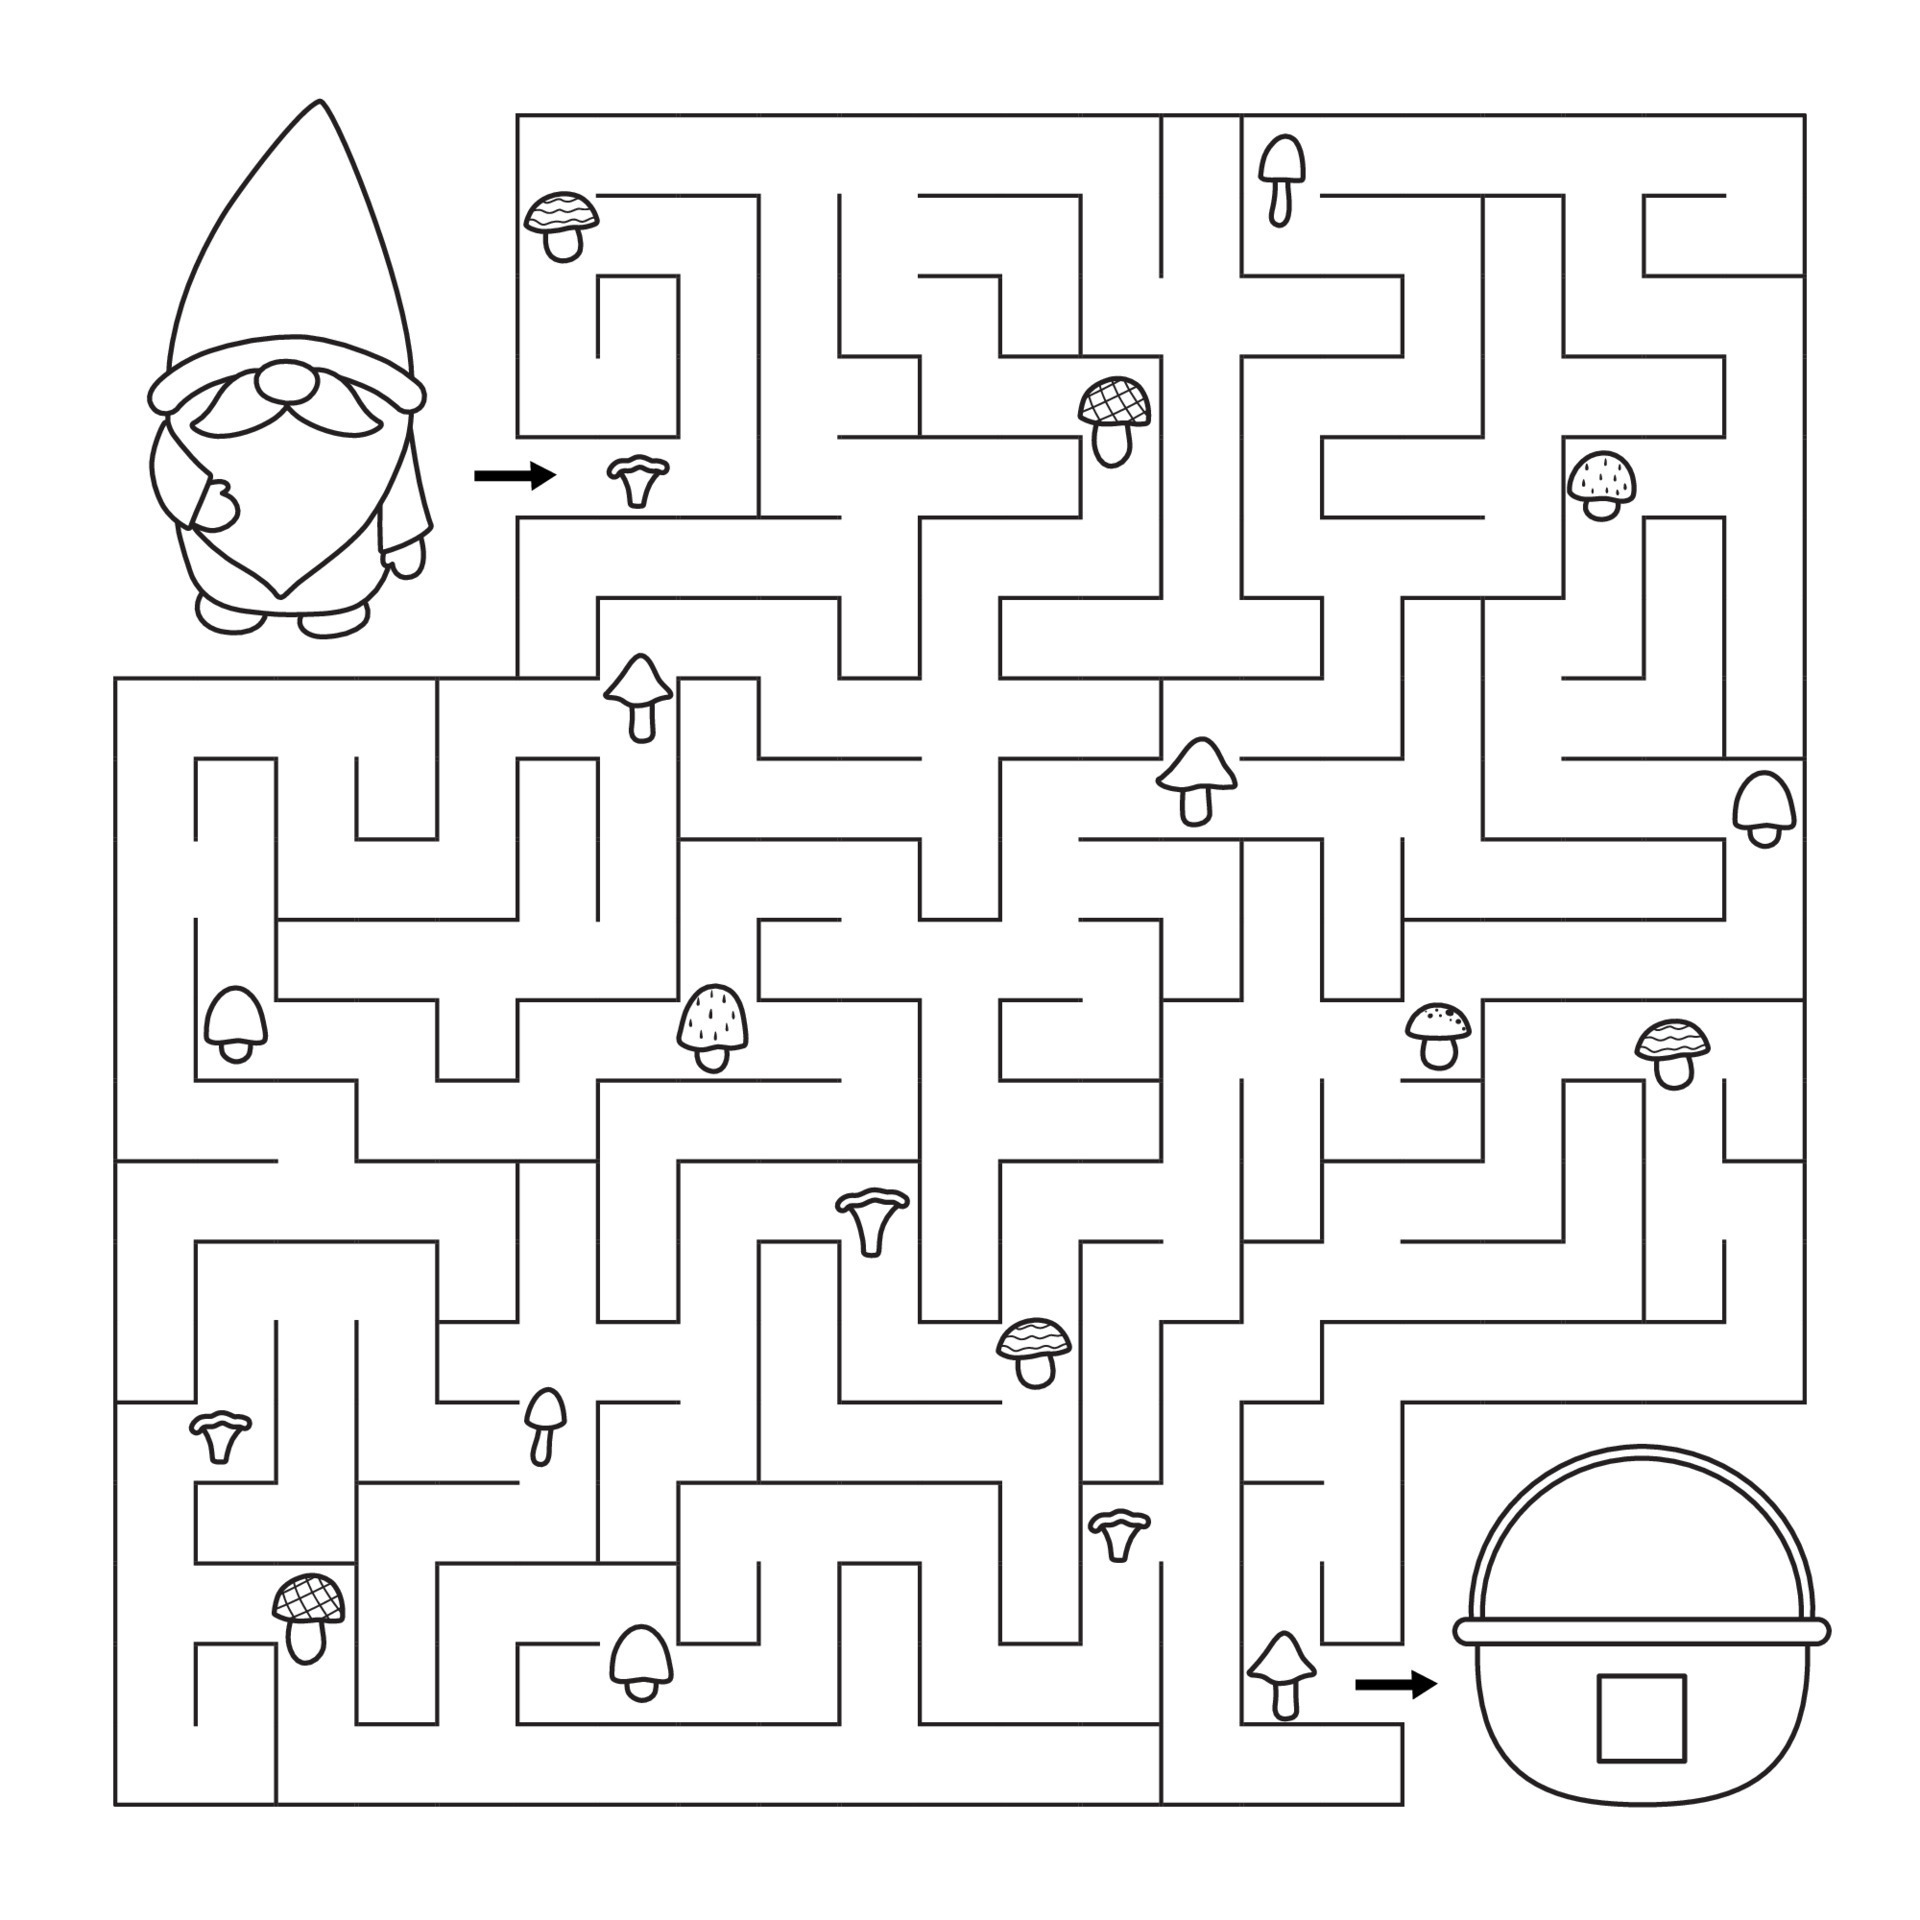 https://static.vecteezy.com/system/resources/previews/021/096/013/original/coloring-page-with-maze-game-help-the-gnome-find-right-way-and-collect-all-mushrooms-educational-puzzle-for-preschool-and-school-kids-illustration-vector.jpg